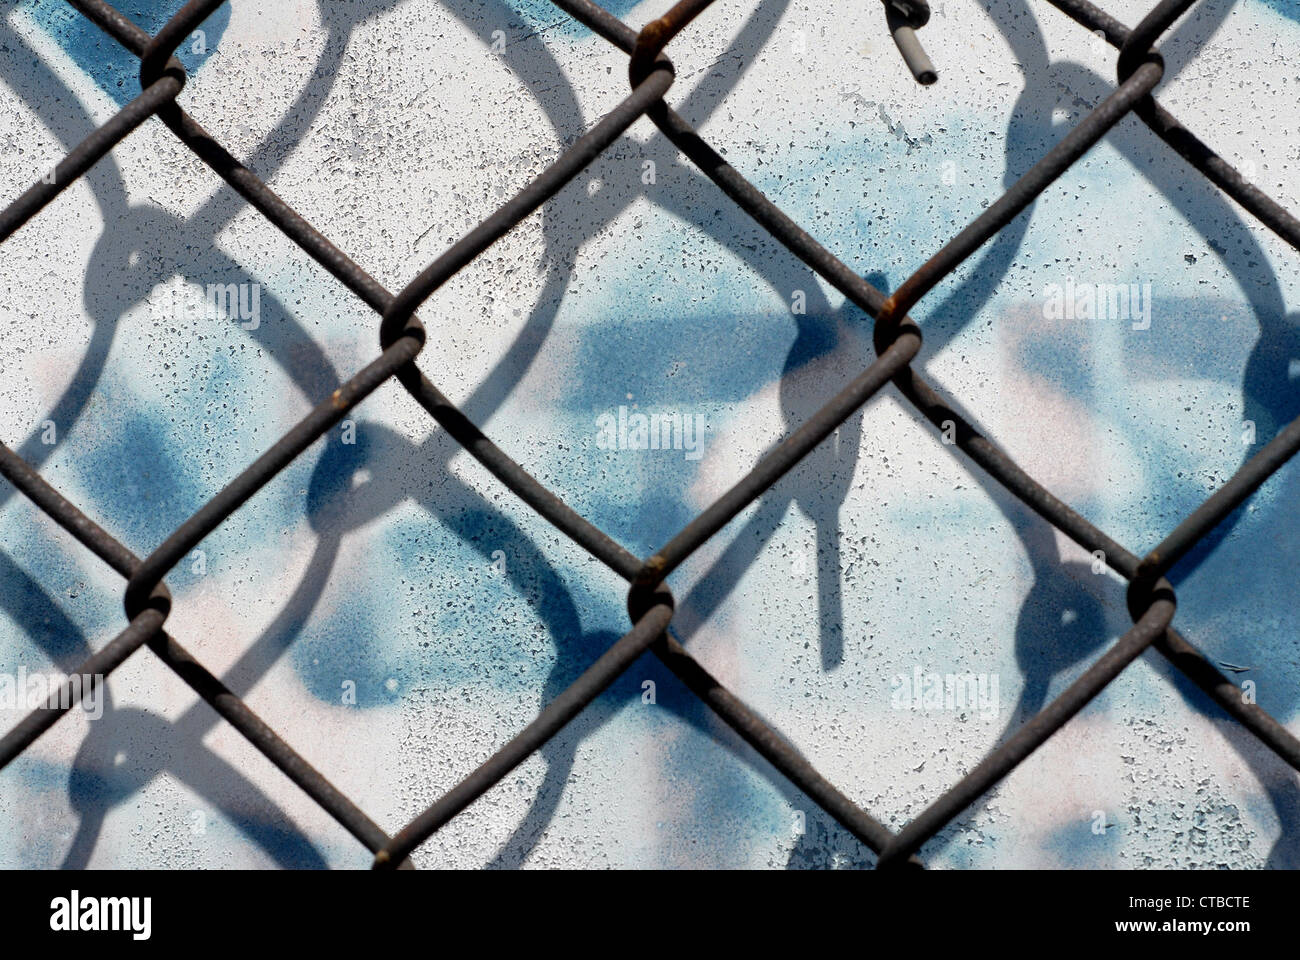 Close-up on a chain link fence against a white background with blue dripping spray paint Stock Photo